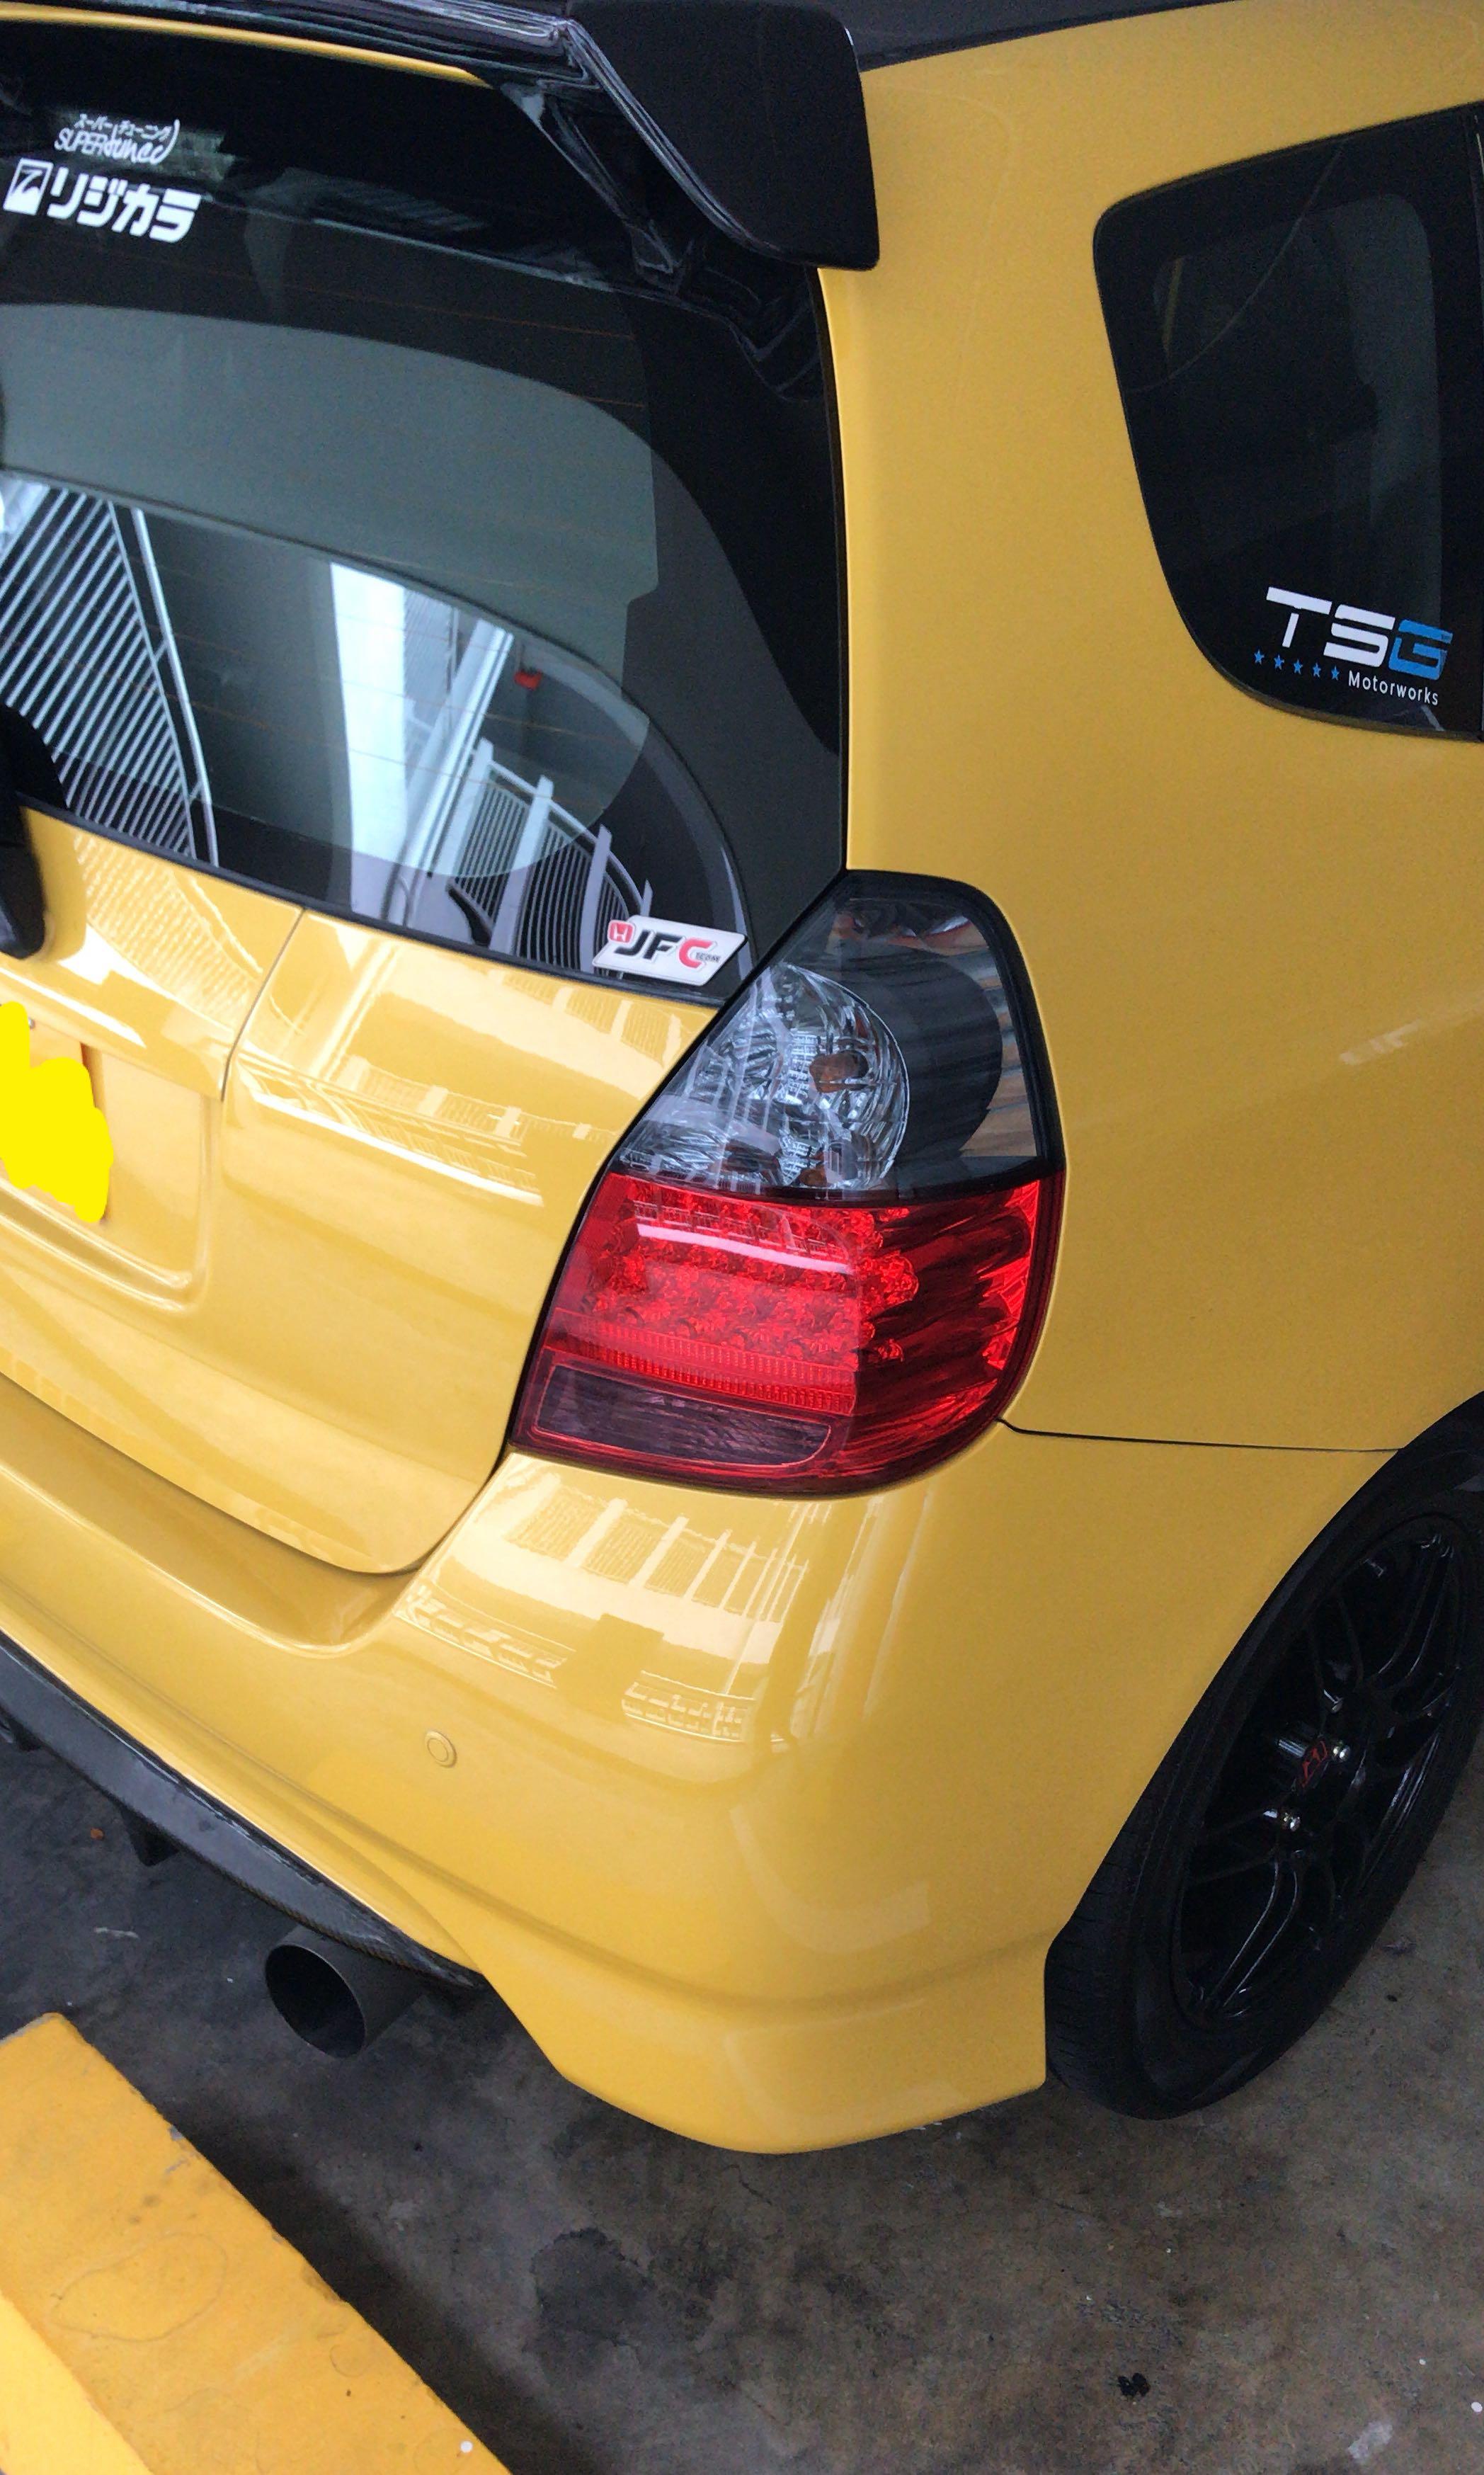 Honda Jazz/Fit Gd1/3 smoked tail lights, Car Accessories, Accessories on  Carousell